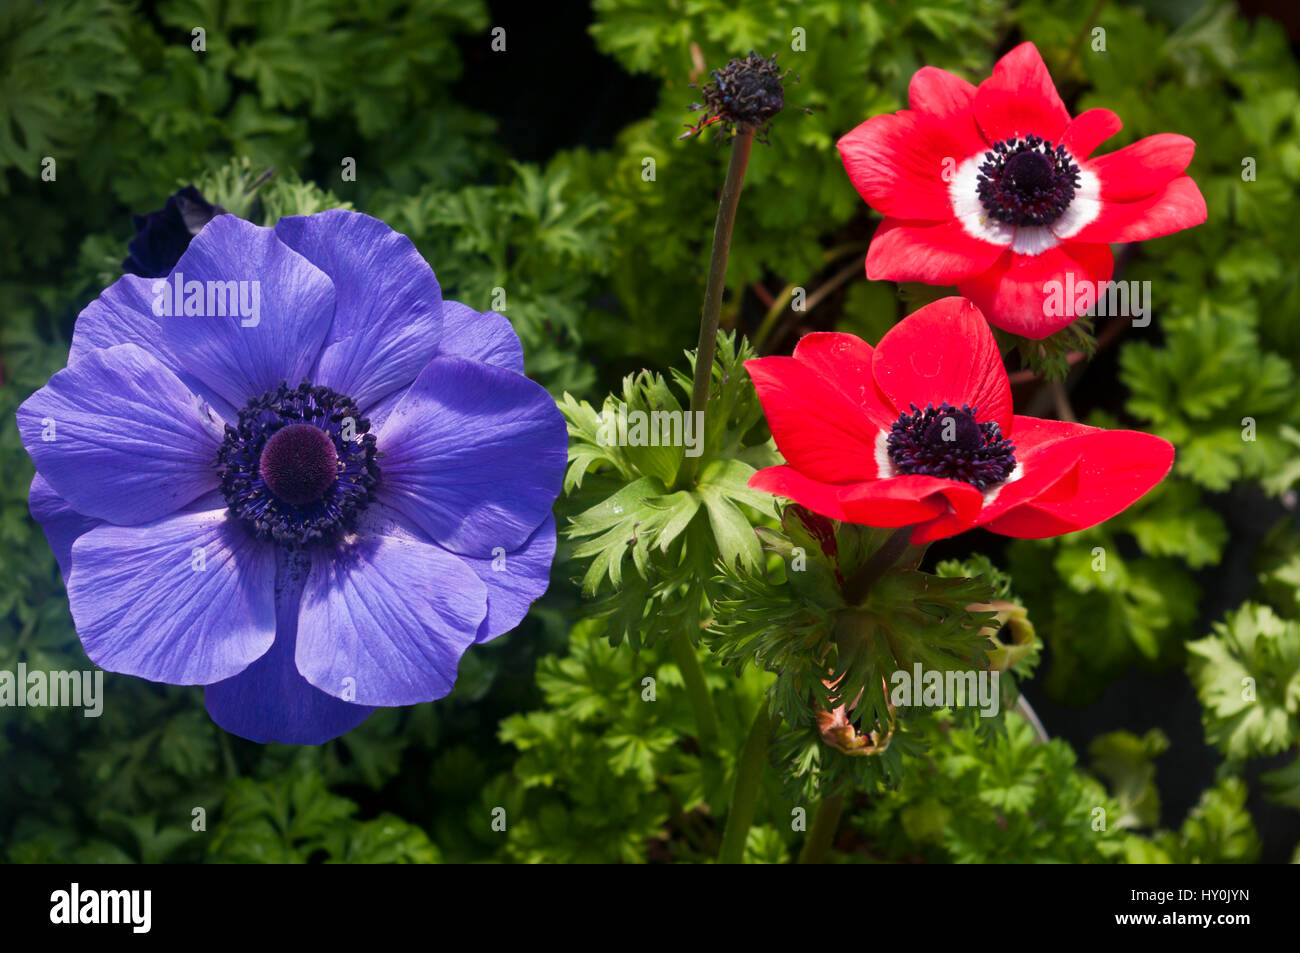 Red and Blue Anemones Flowers ' Anemone Harmony ' Stock Photo